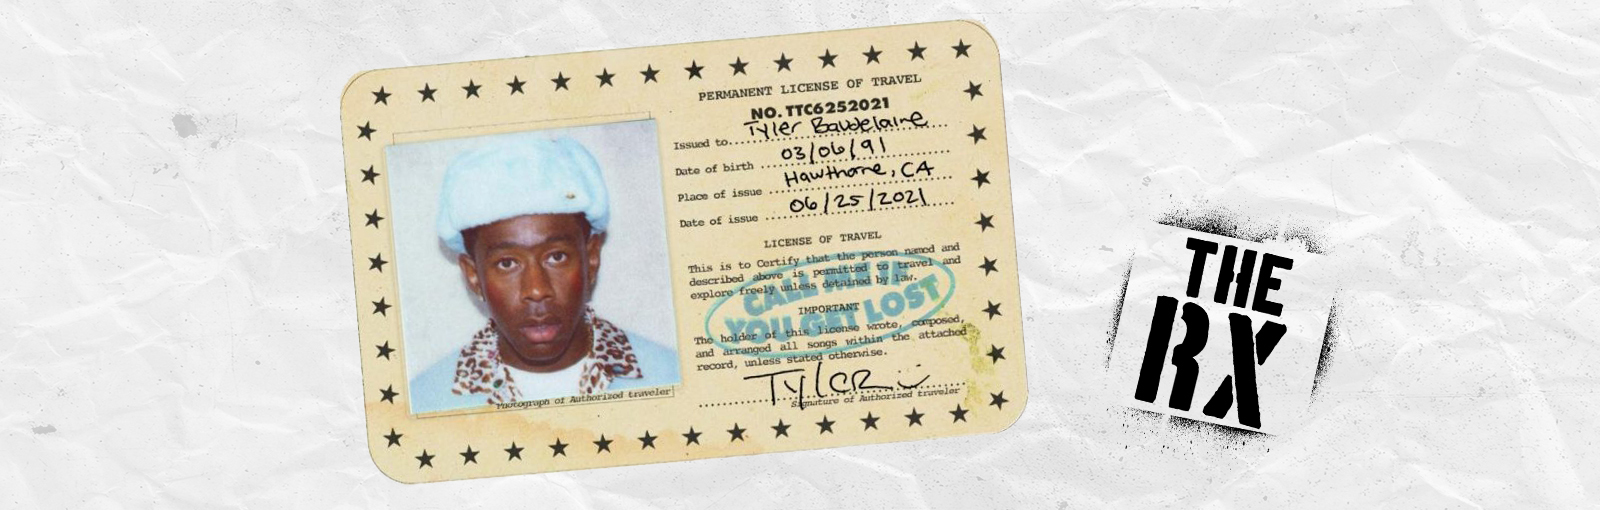 Breaking Down Tyler, The Creator's 'Call Me If You Ge Lost' Style